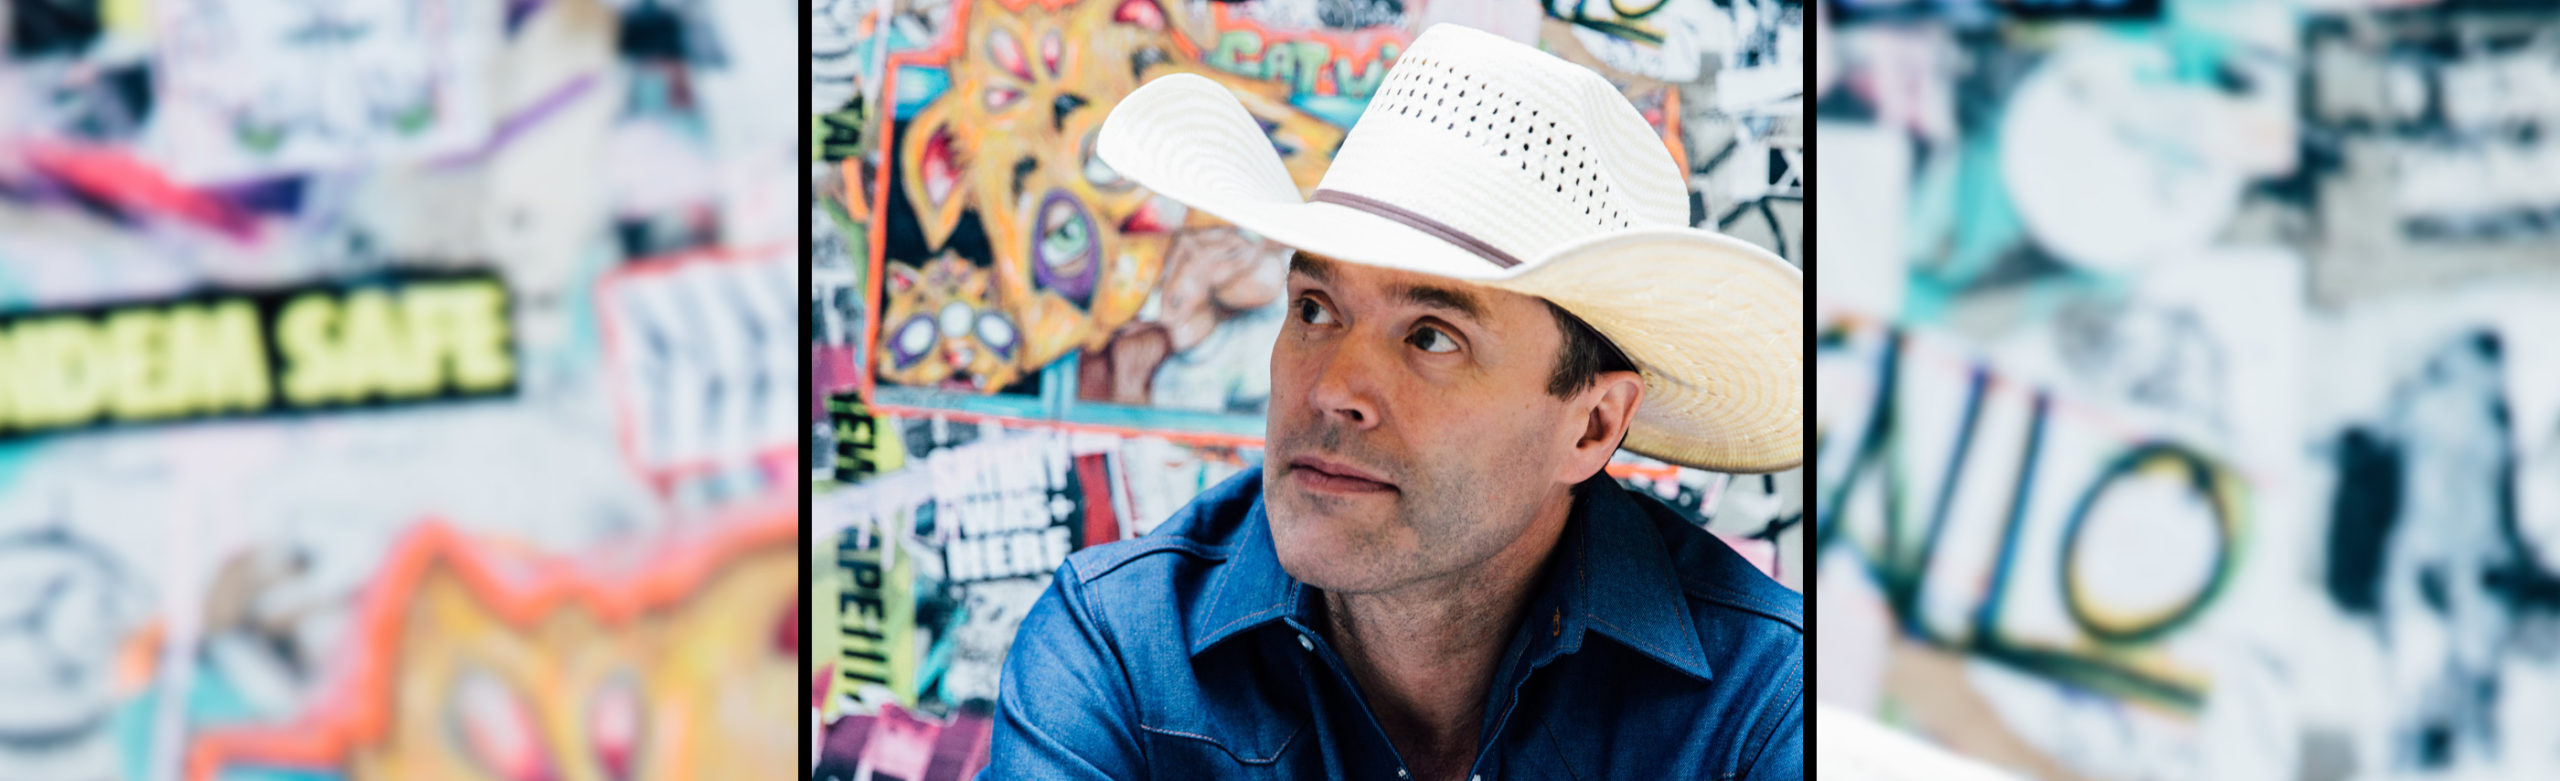 Event Info: Corb Lund at The Wilma Image